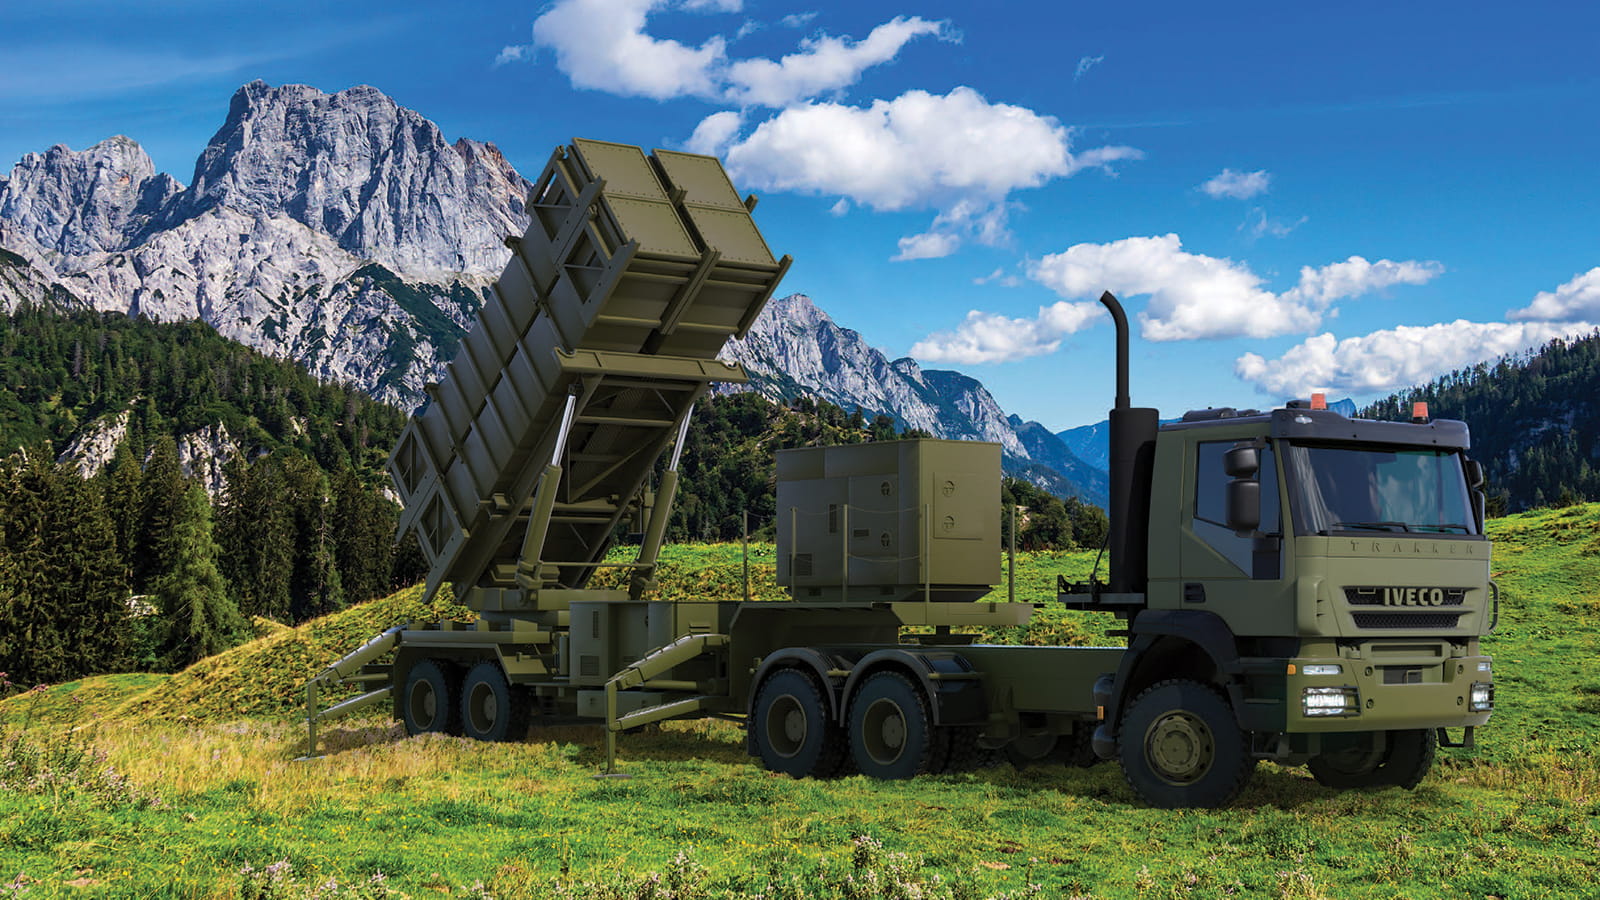 Raytheon receives $1.225bn to produce Patriot PAC-3+ surface-to-air missiles for Switzerland